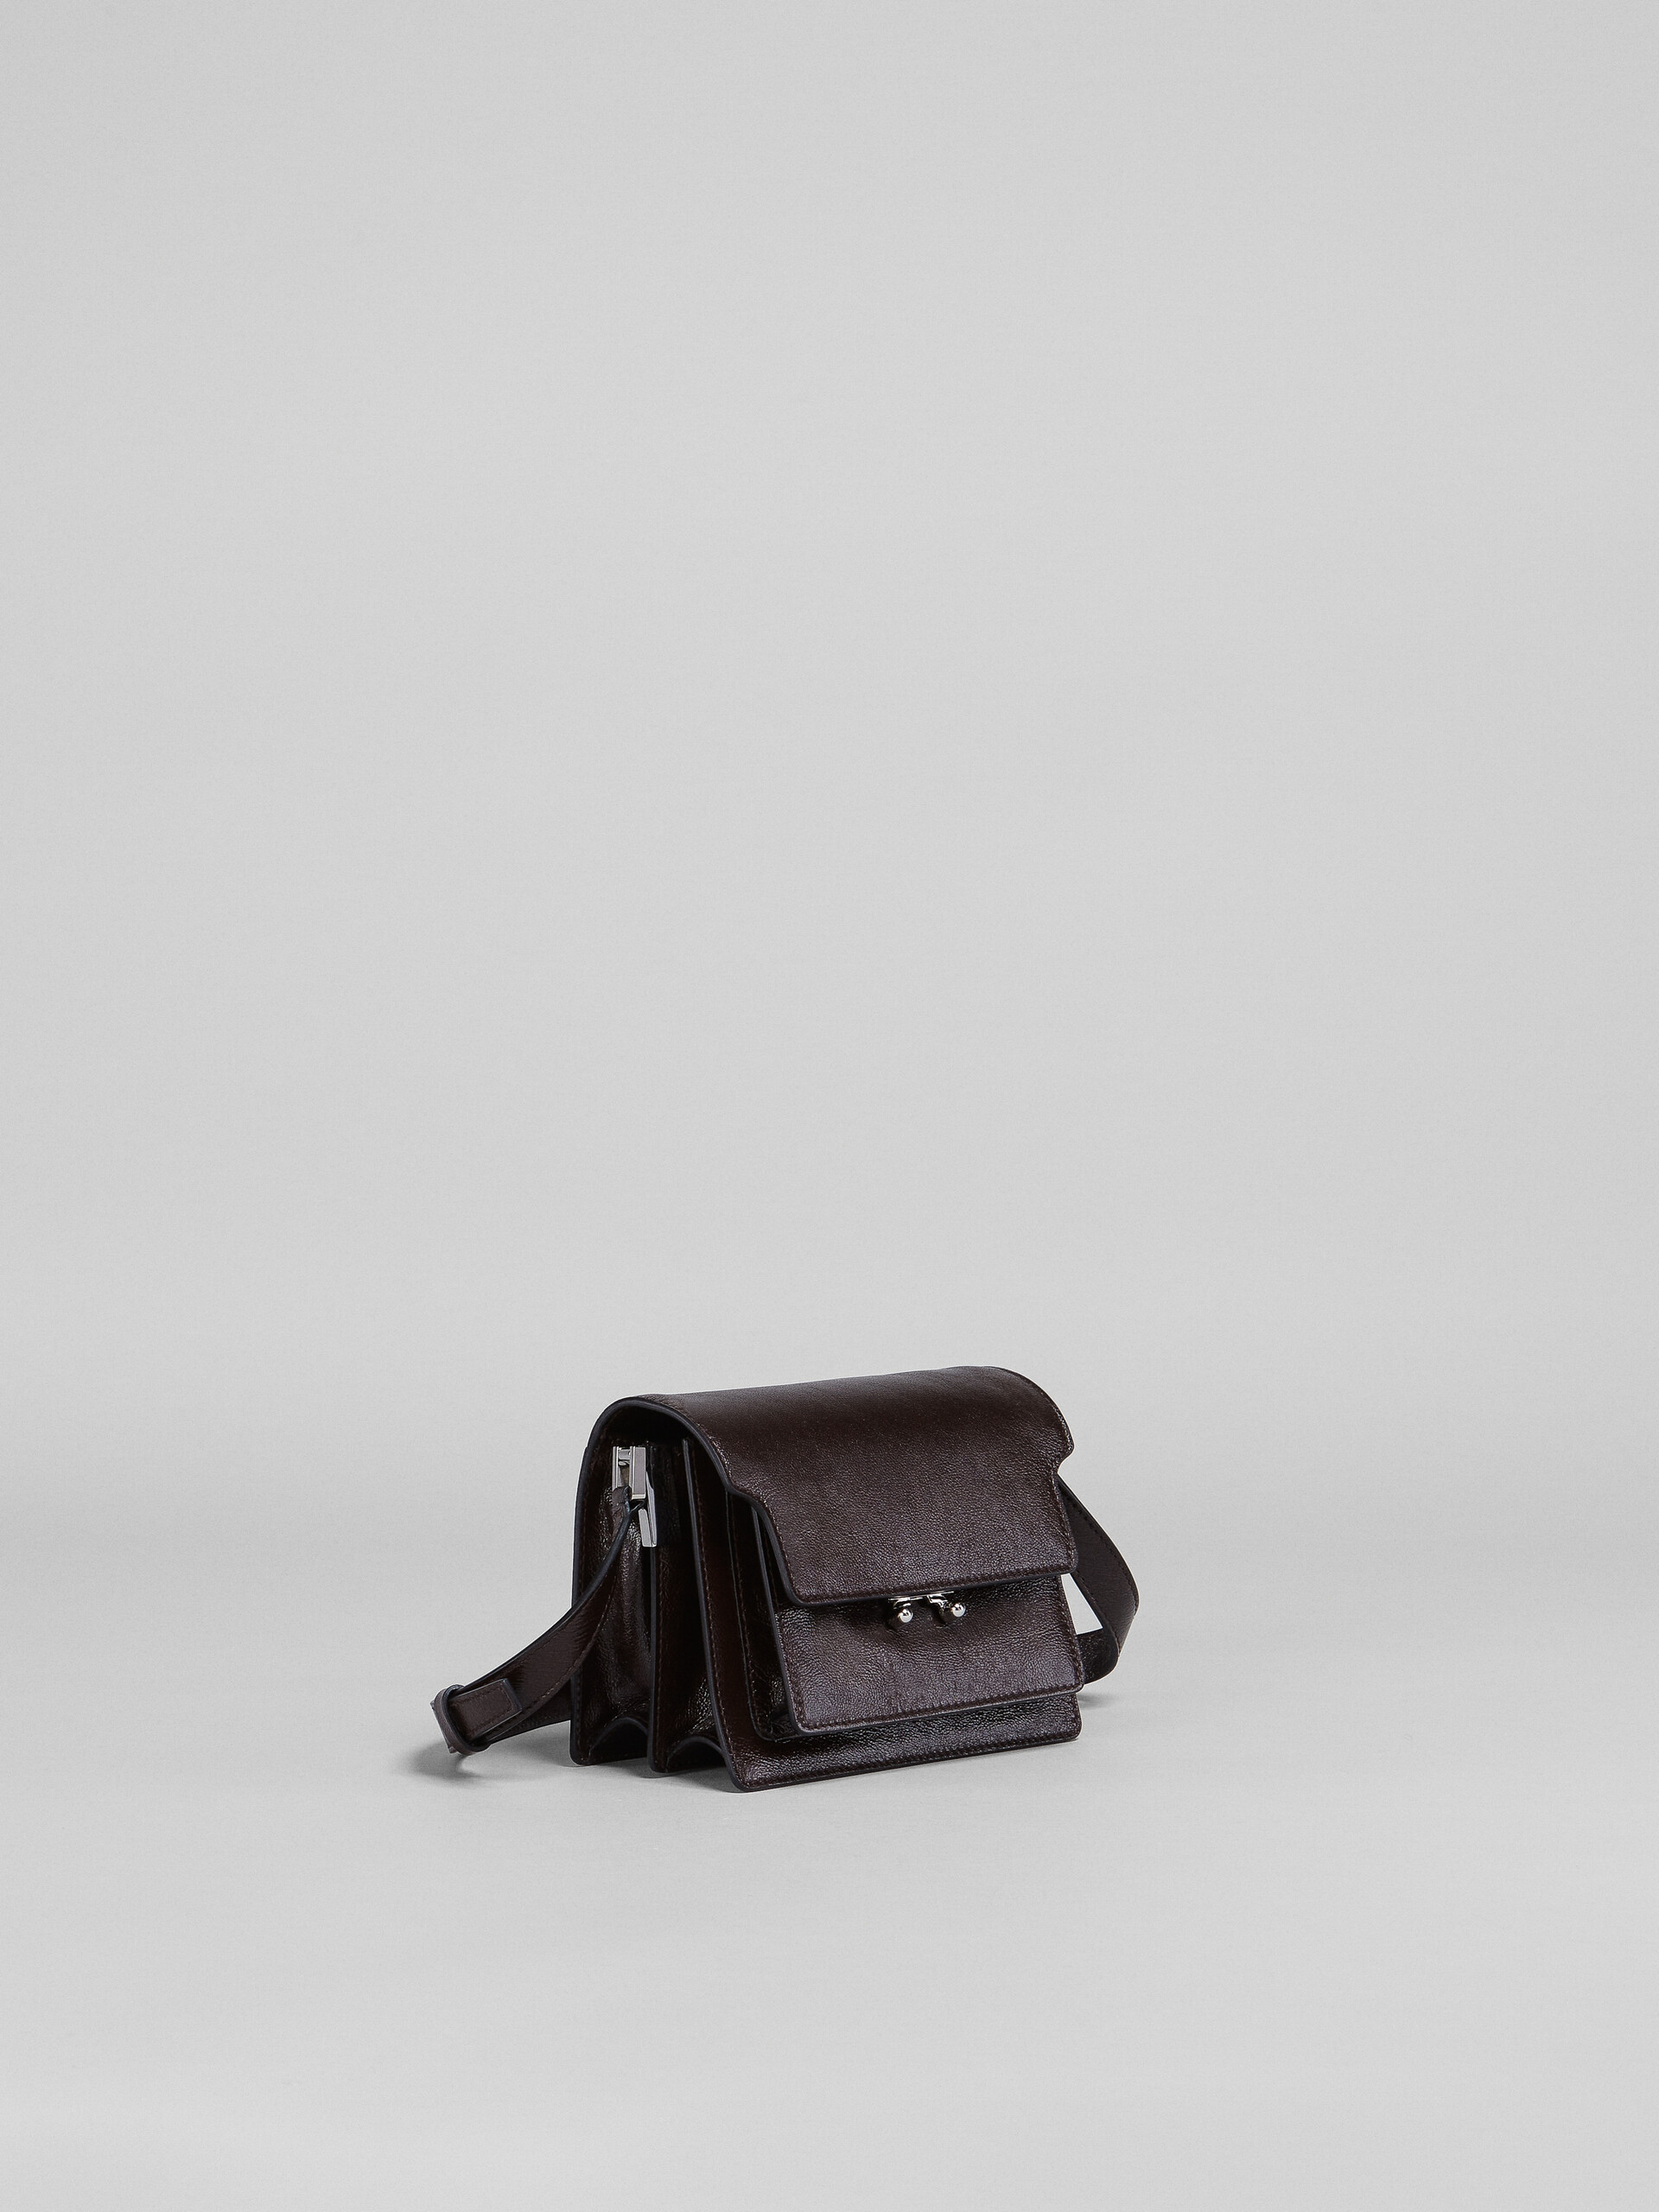 TRUNK SOFT mini bag in brown leather - Shoulder Bags - Image 4